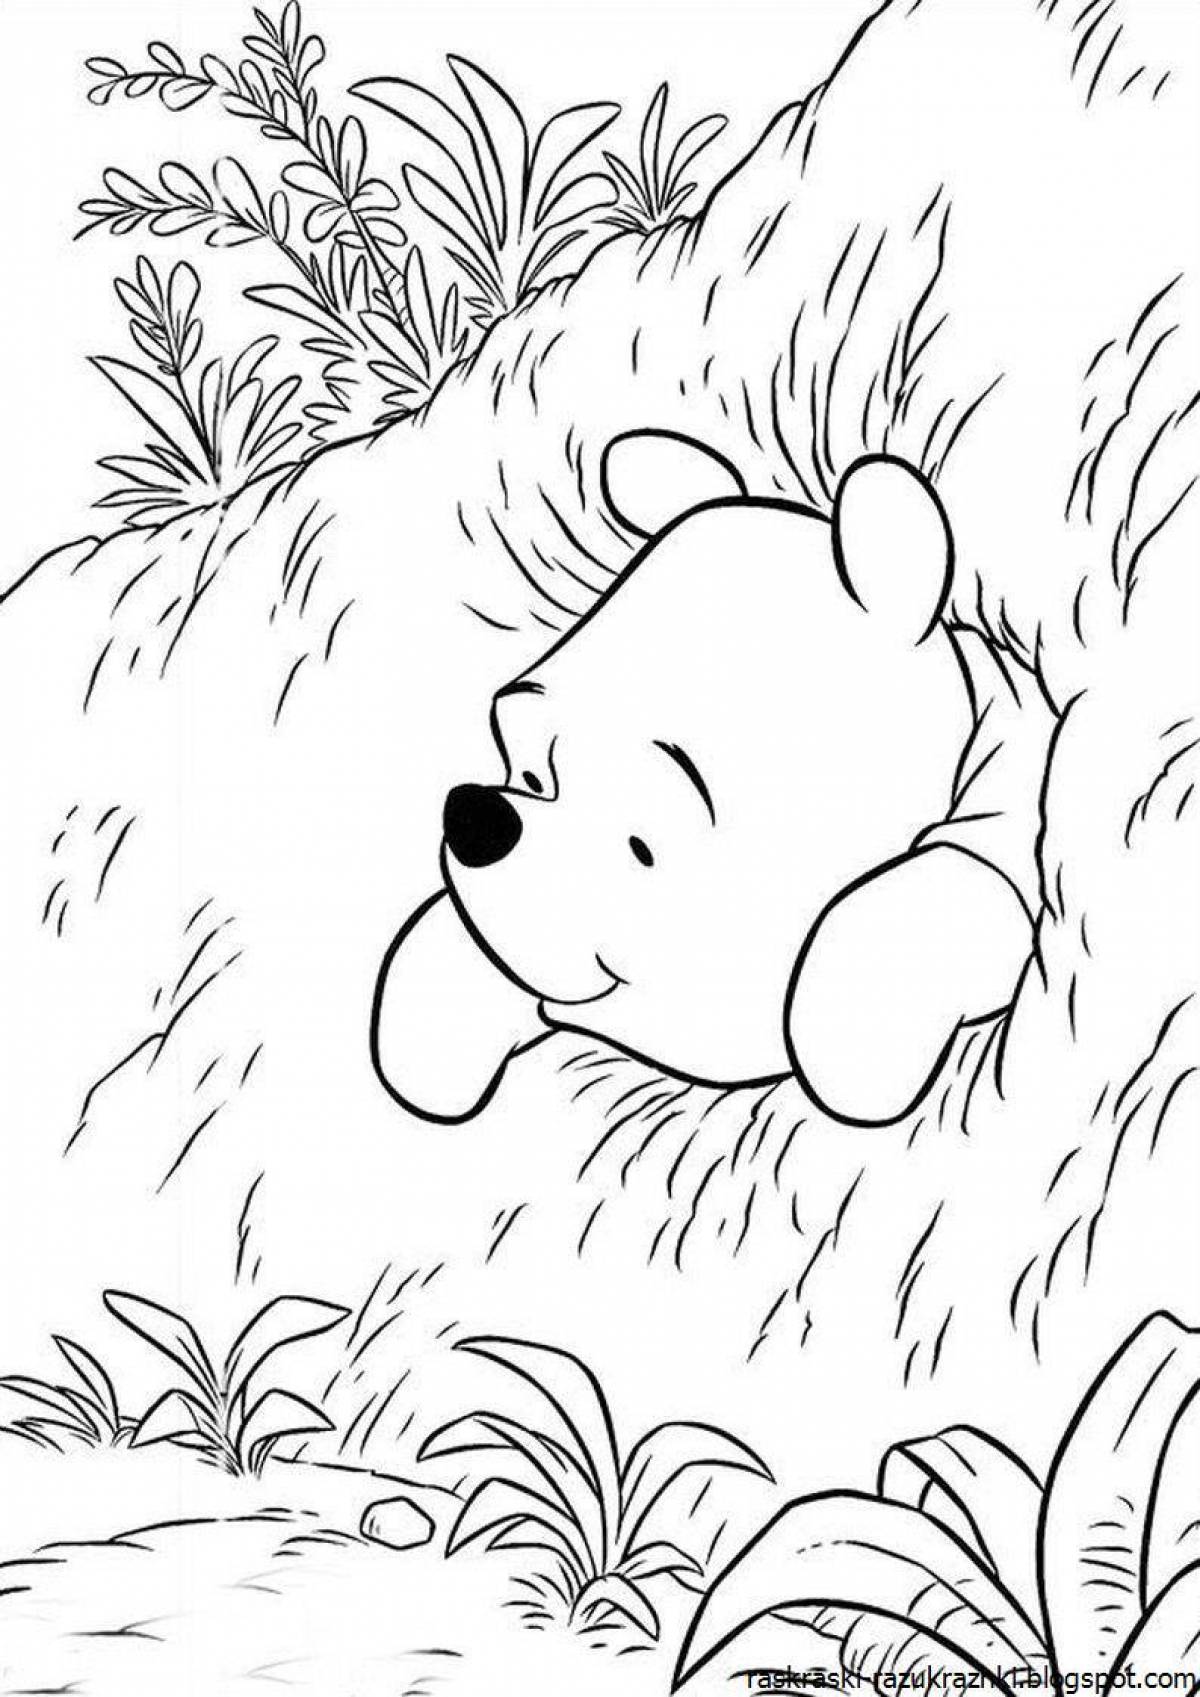 Winnie the pooh humorous coloring book